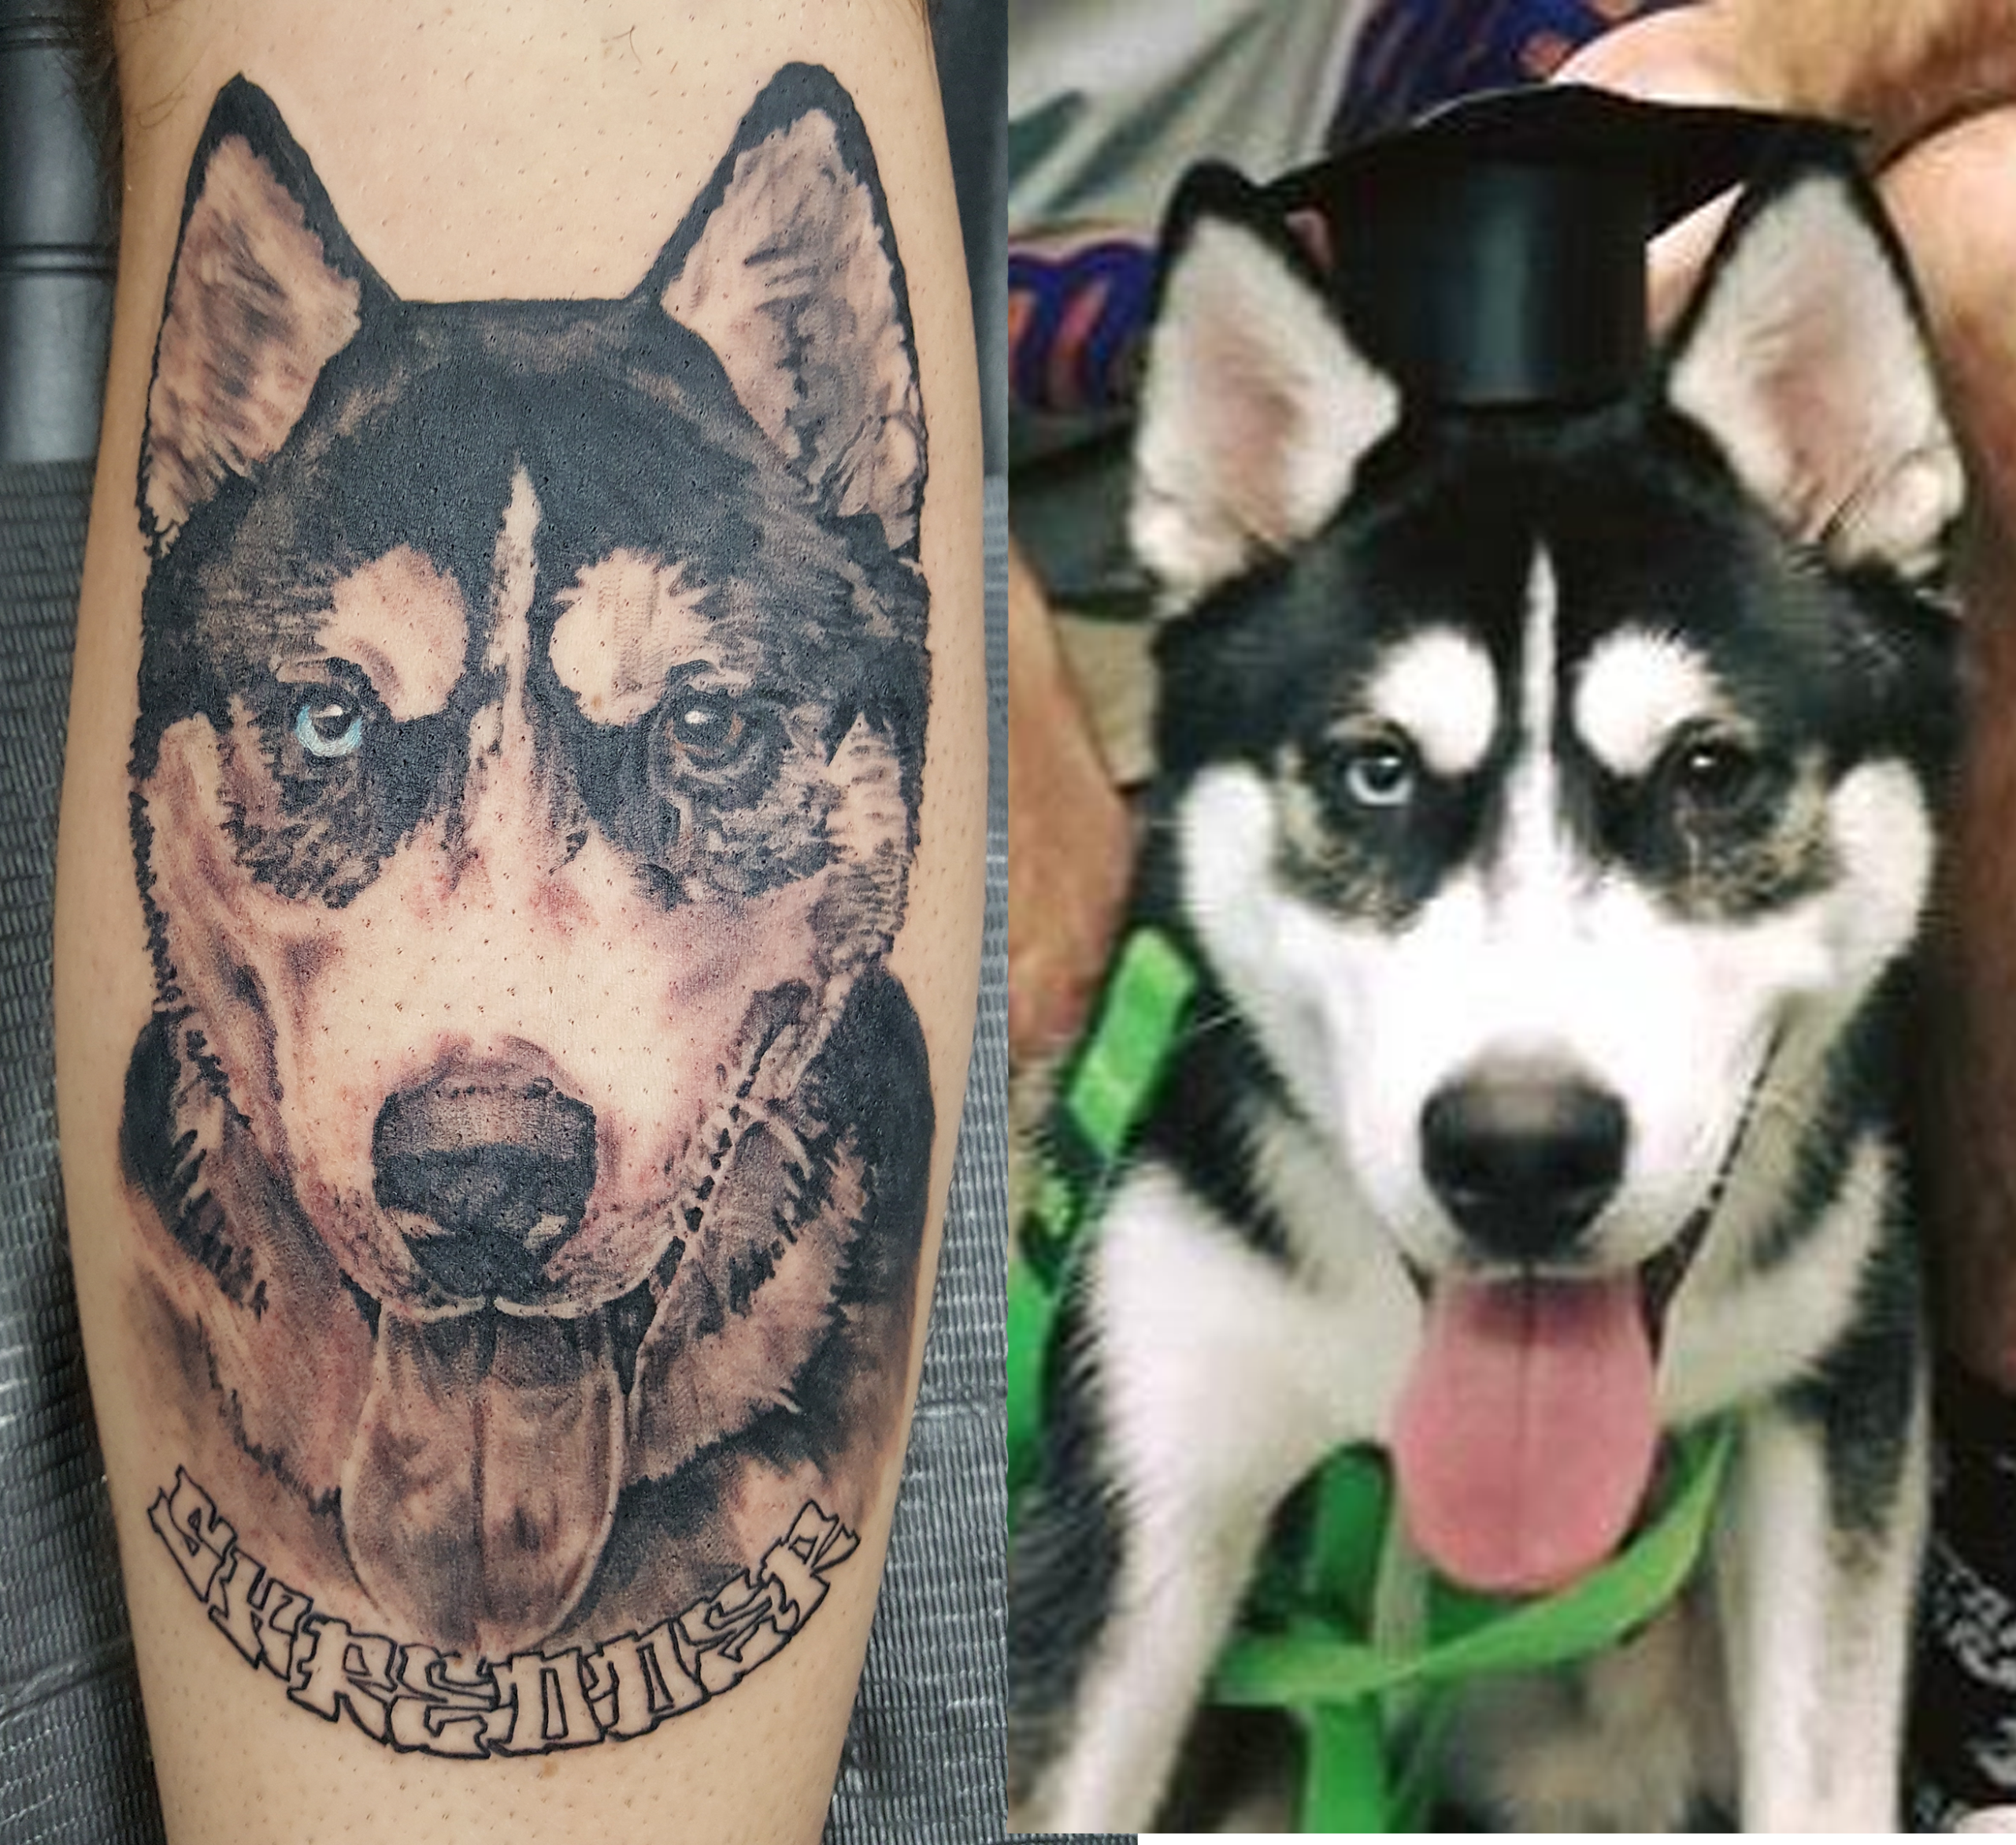 Realistic black and grey tattoo of his husy who passed. His name was Shredder